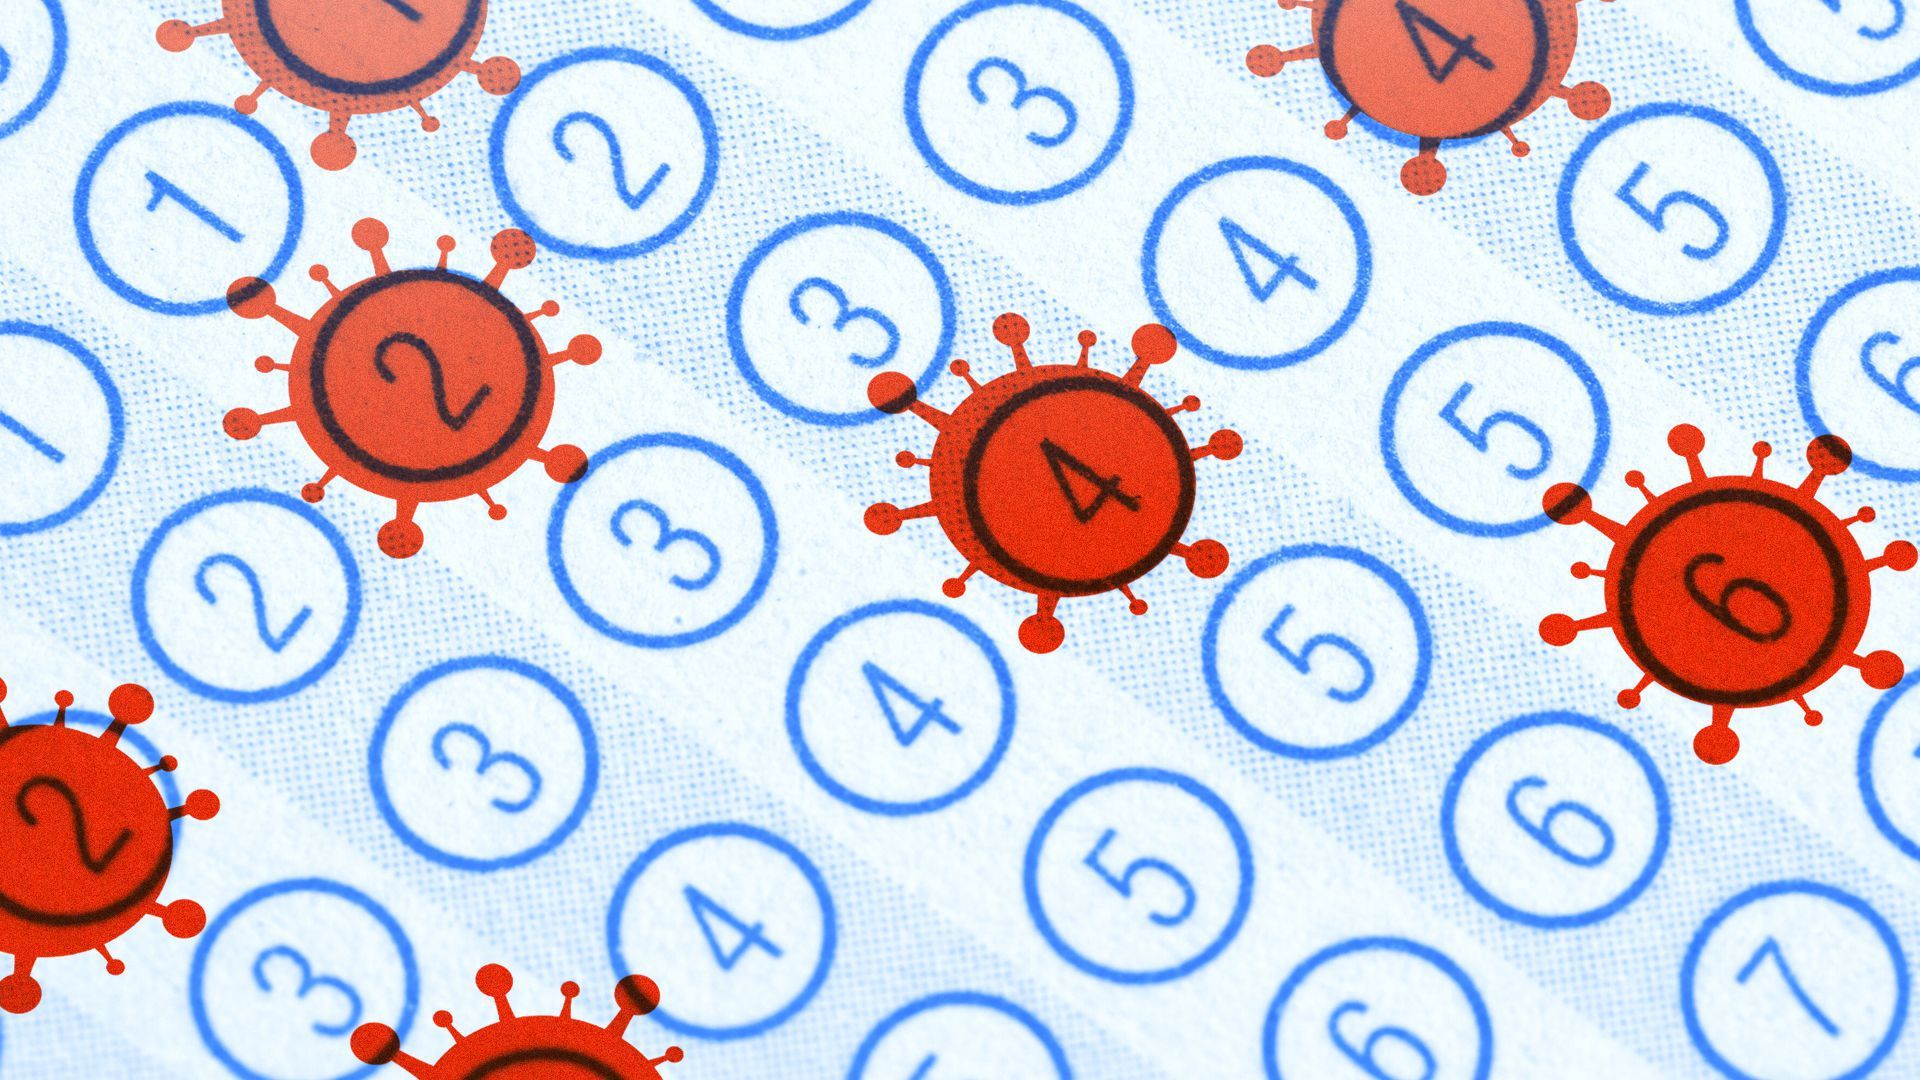 Illustration of a standardized testing bubble sheet and viruses.